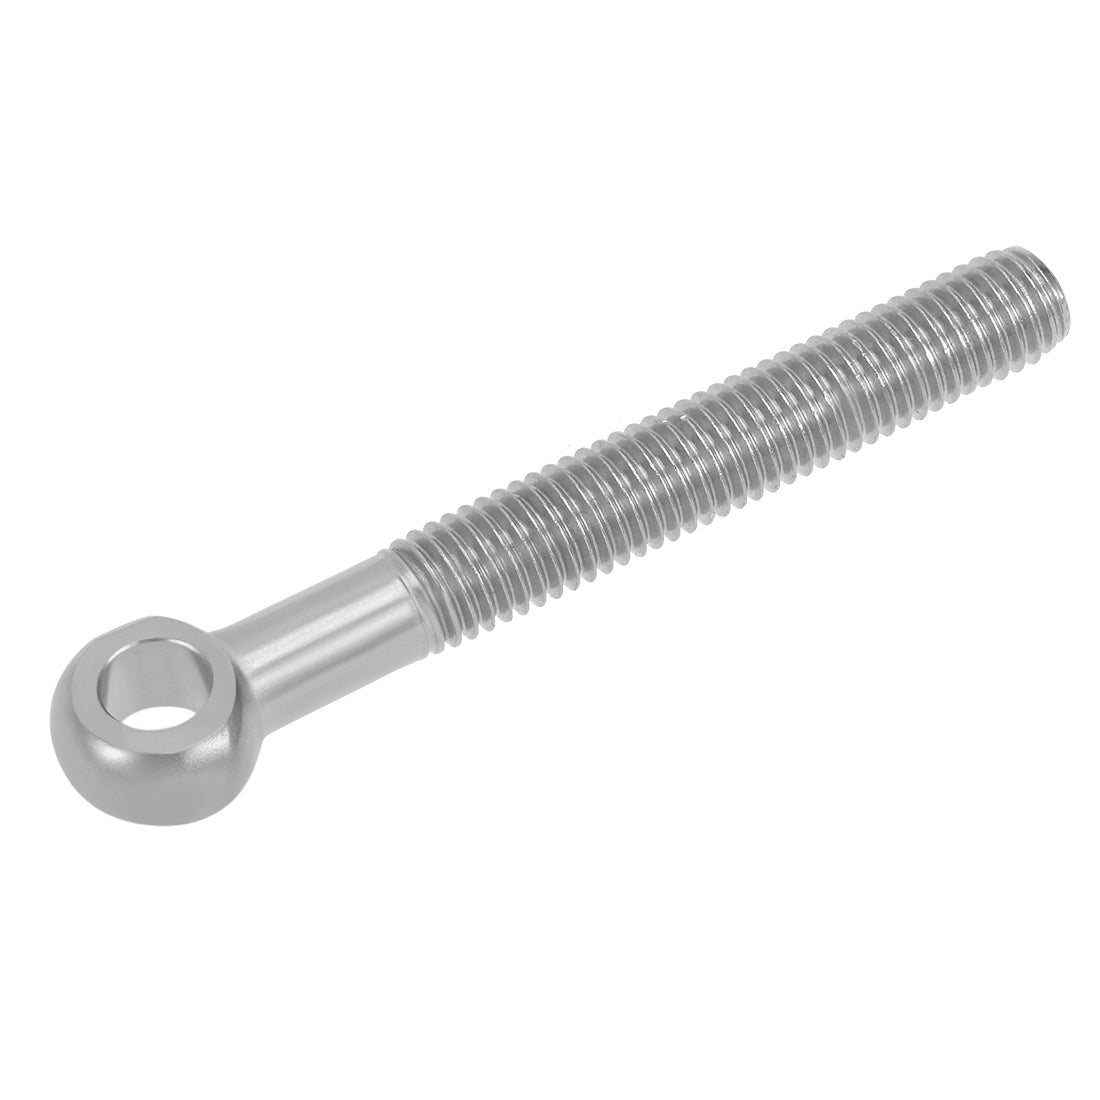 uxcell Uxcell M10 x 80mm Machinery Shoulder Swing Lifting Eye Bolt 304 Stainless Steel Metric Thread